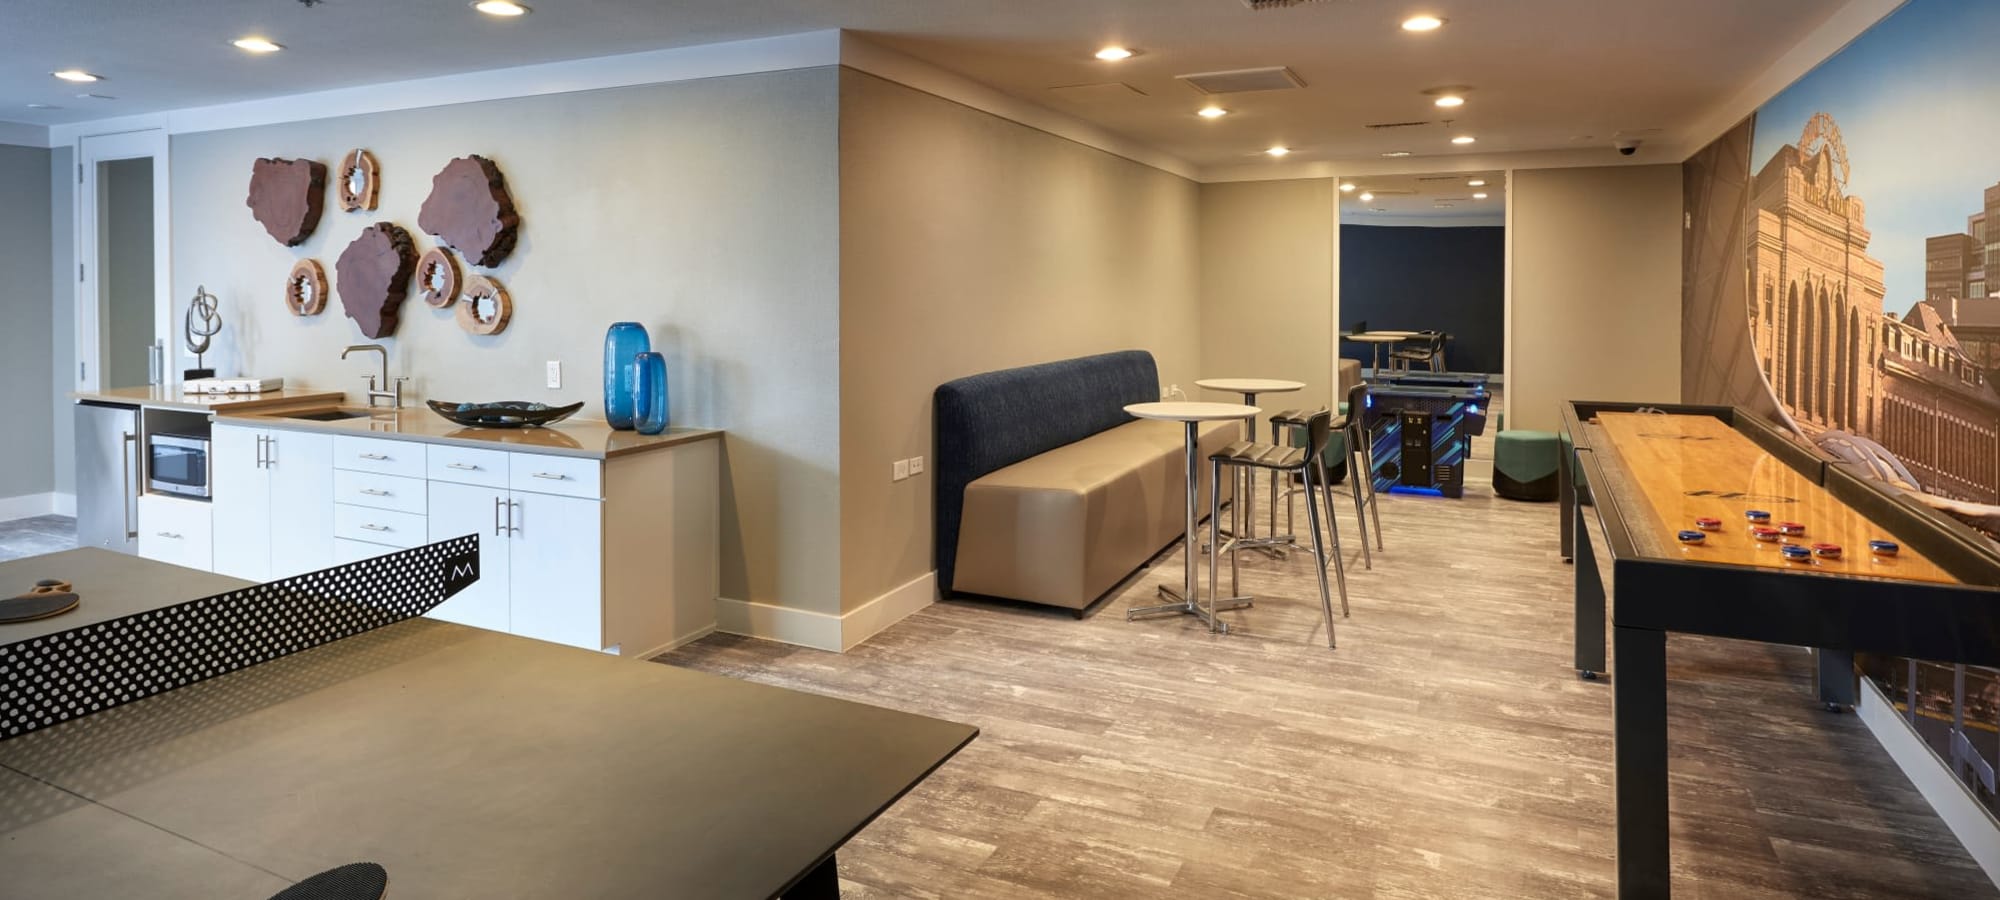 Schedule a tour of Marq Inverness in Englewood, Colorado